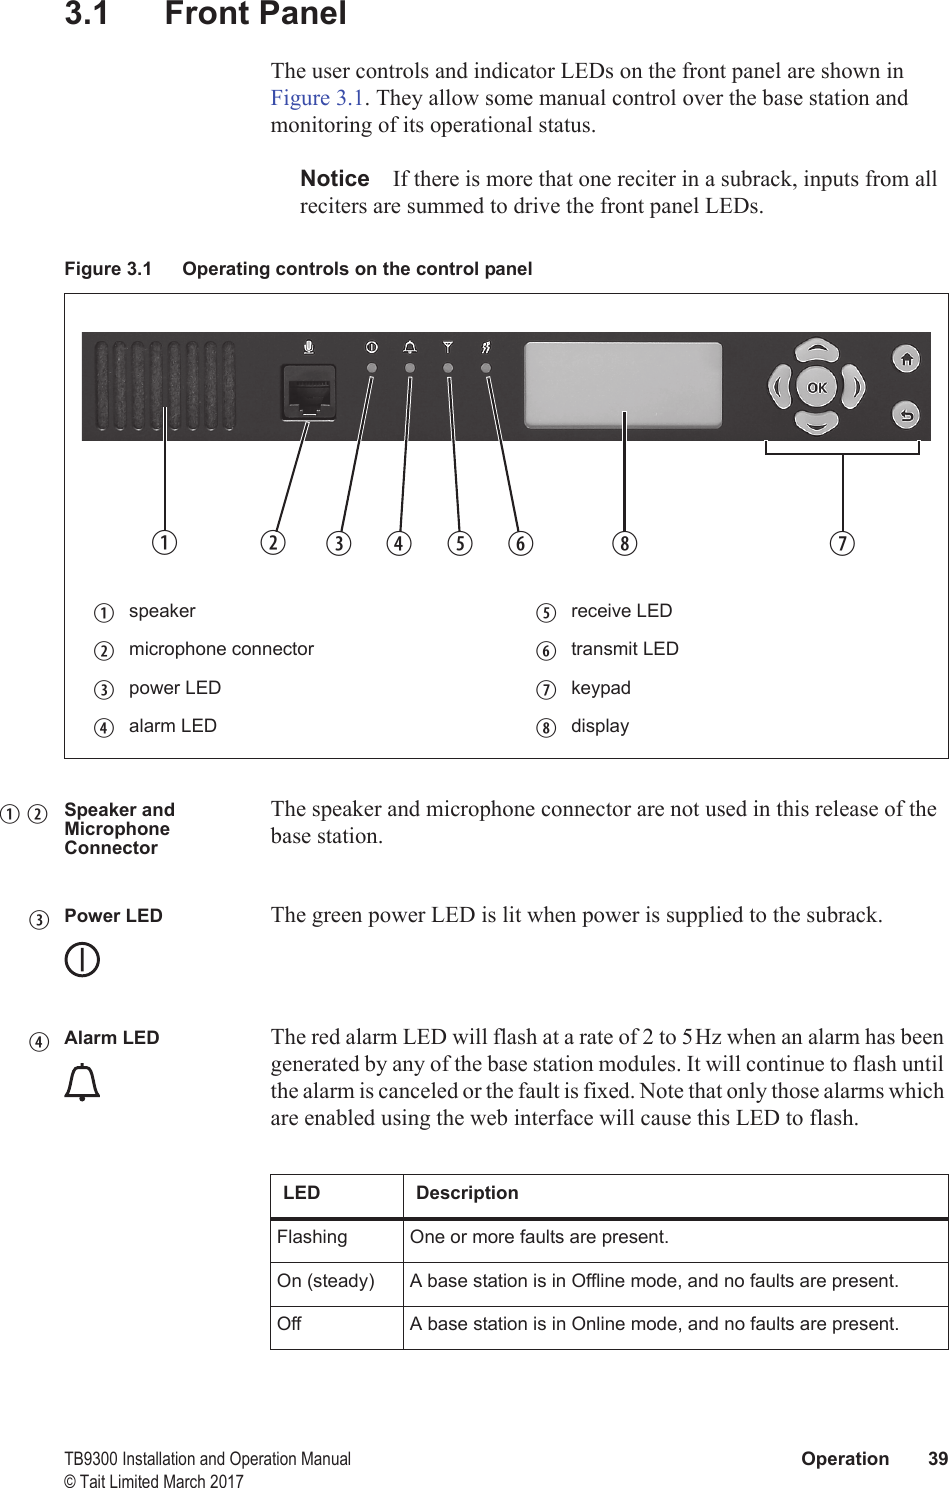  TB9300 Installation and Operation Manual Operation 39© Tait Limited March 20173.1 Front PanelThe user controls and indicator LEDs on the front panel are shown in Figure 3.1. They allow some manual control over the base station and monitoring of its operational status.Notice If there is more that one reciter in a subrack, inputs from all reciters are summed to drive the front panel LEDs.Speaker and Microphone ConnectorThe speaker and microphone connector are not used in this release of the base station.Power LED The green power LED is lit when power is supplied to the subrack.Alarm LED The red alarm LED will flash at a rate of 2 to 5Hz when an alarm has been generated by any of the base station modules. It will continue to flash until the alarm is canceled or the fault is fixed. Note that only those alarms which are enabled using the web interface will cause this LED to flash.Figure 3.1 Operating controls on the control panelbspeaker freceive LEDcmicrophone connector gtransmit LEDdpower LED hkeypadealarm LED idisplaybcd e fg i hb cdeLED DescriptionFlashing One or more faults are present.On (steady) A base station is in Offline mode, and no faults are present.Off A base station is in Online mode, and no faults are present.